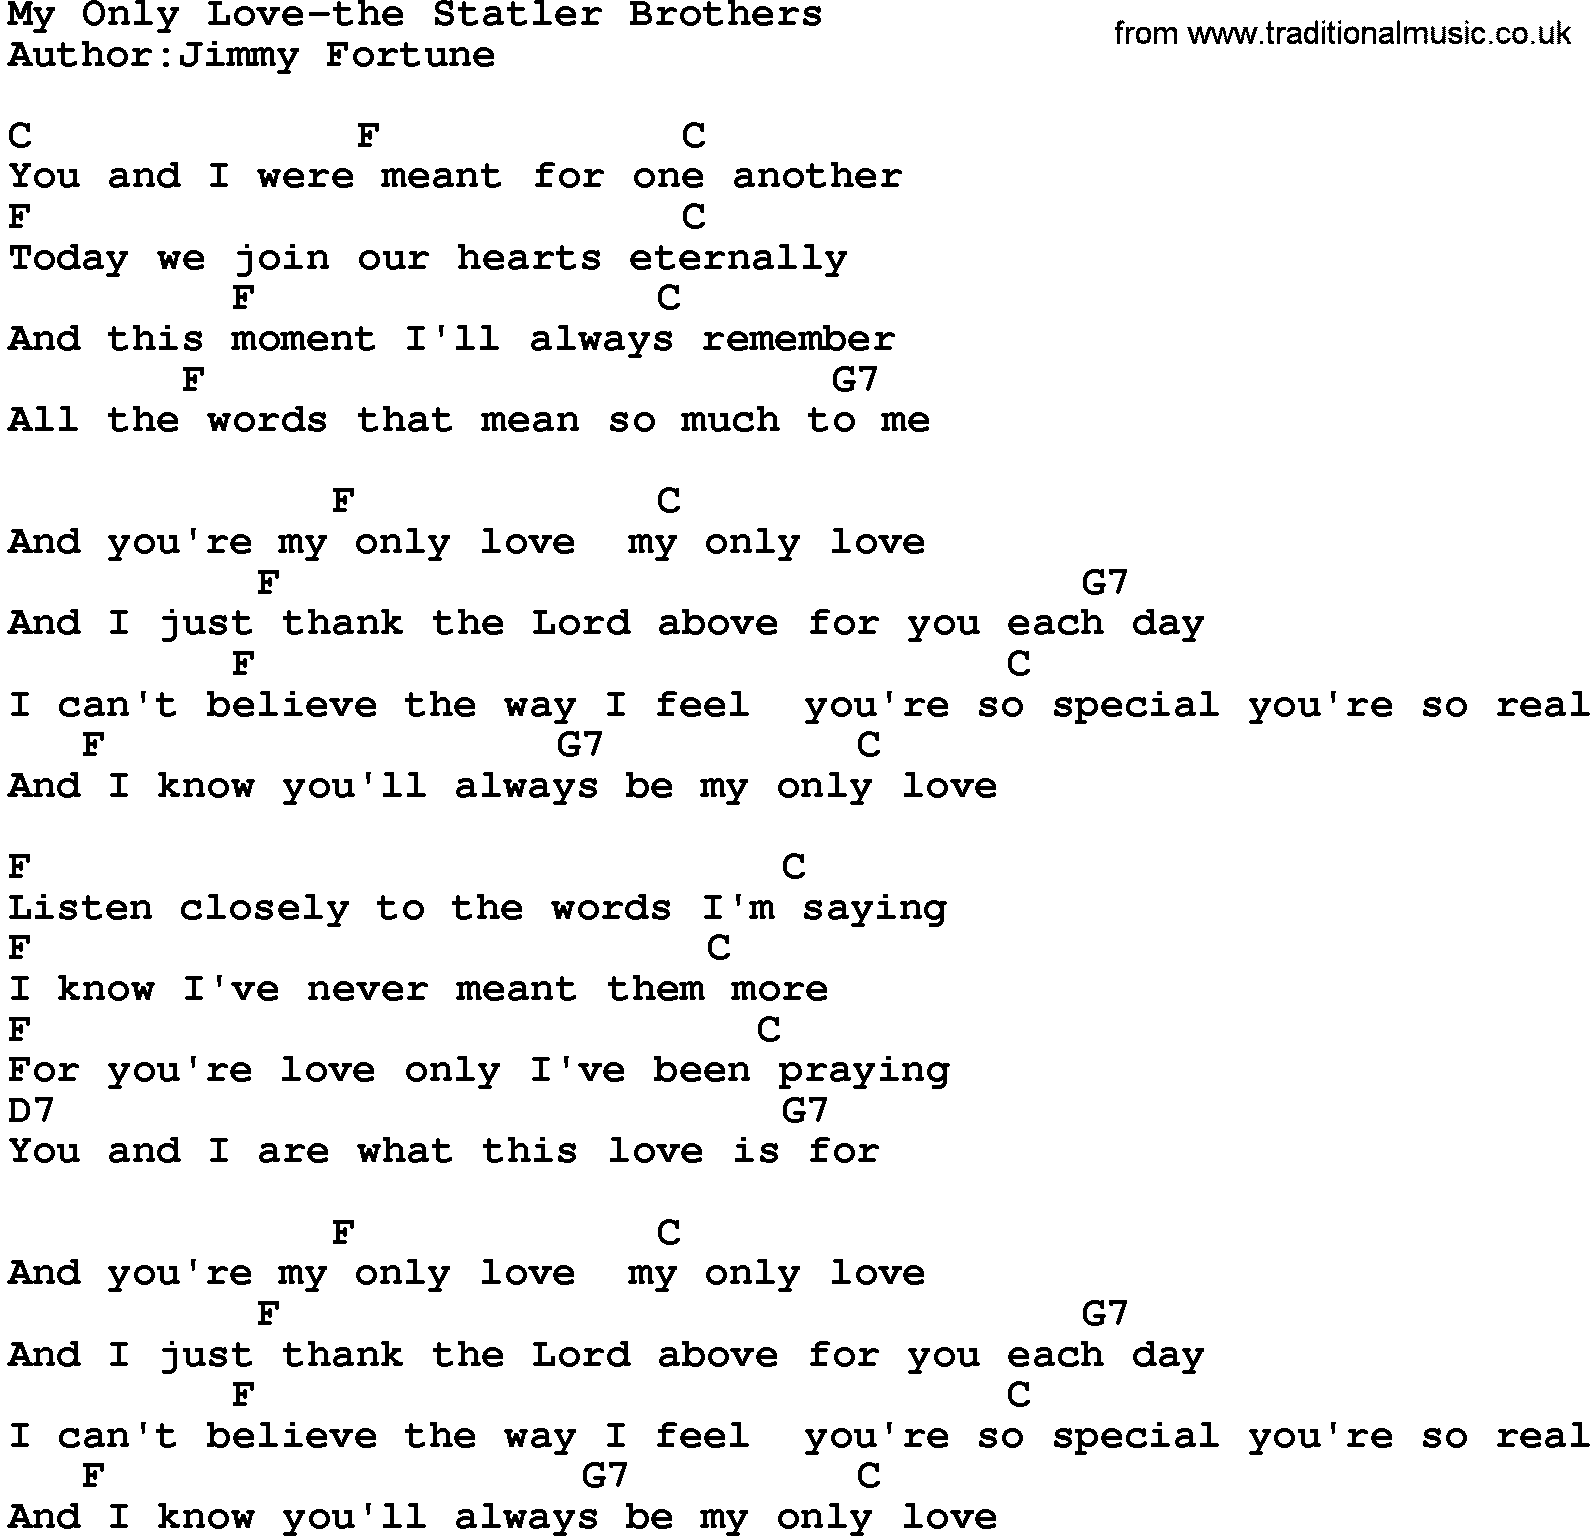 Country music song: My Only Love-The Statler Brothers lyrics and chords